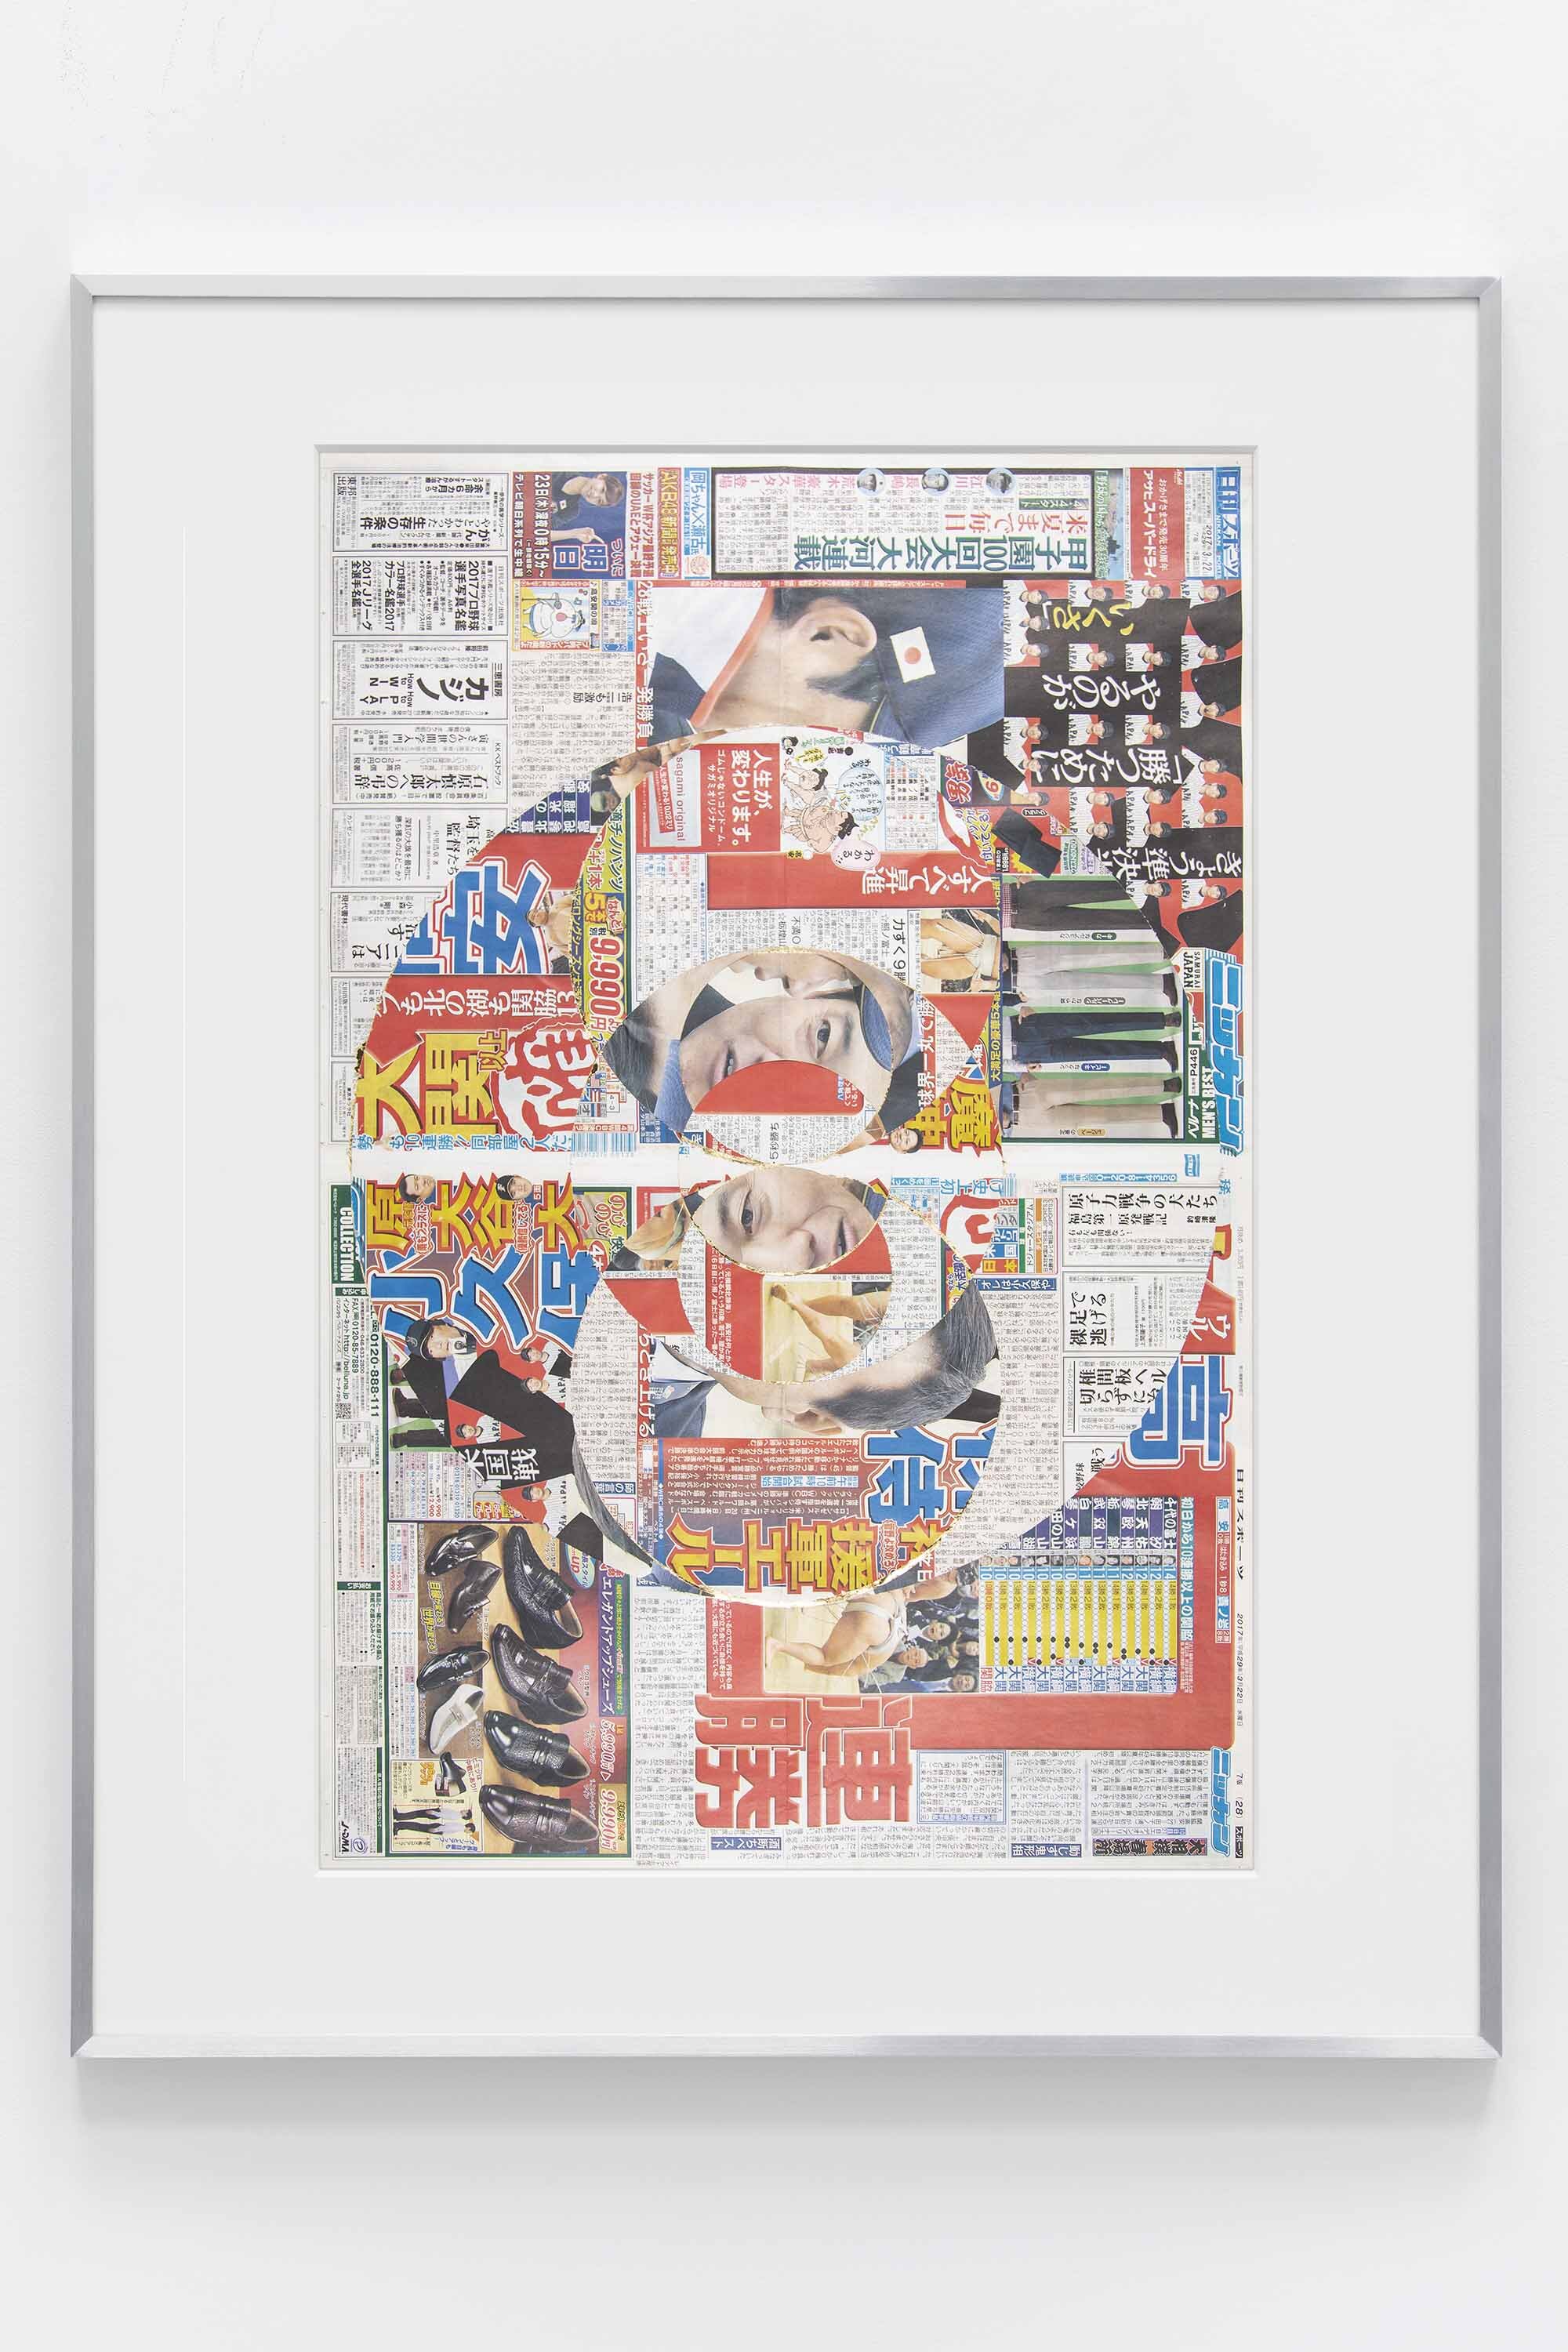   Blind Collage (Seven 180º Rotations, Nikkan Sports: Tokyo, Japan, Wednesday, March 22, 2017)   2021  Newspaper, tape, and 22 karat gold leaf  39 1/8 x 31 1/4 inches   Blind Collages, 2017–   Exhibition:   Foreign Correspondence, 2021  